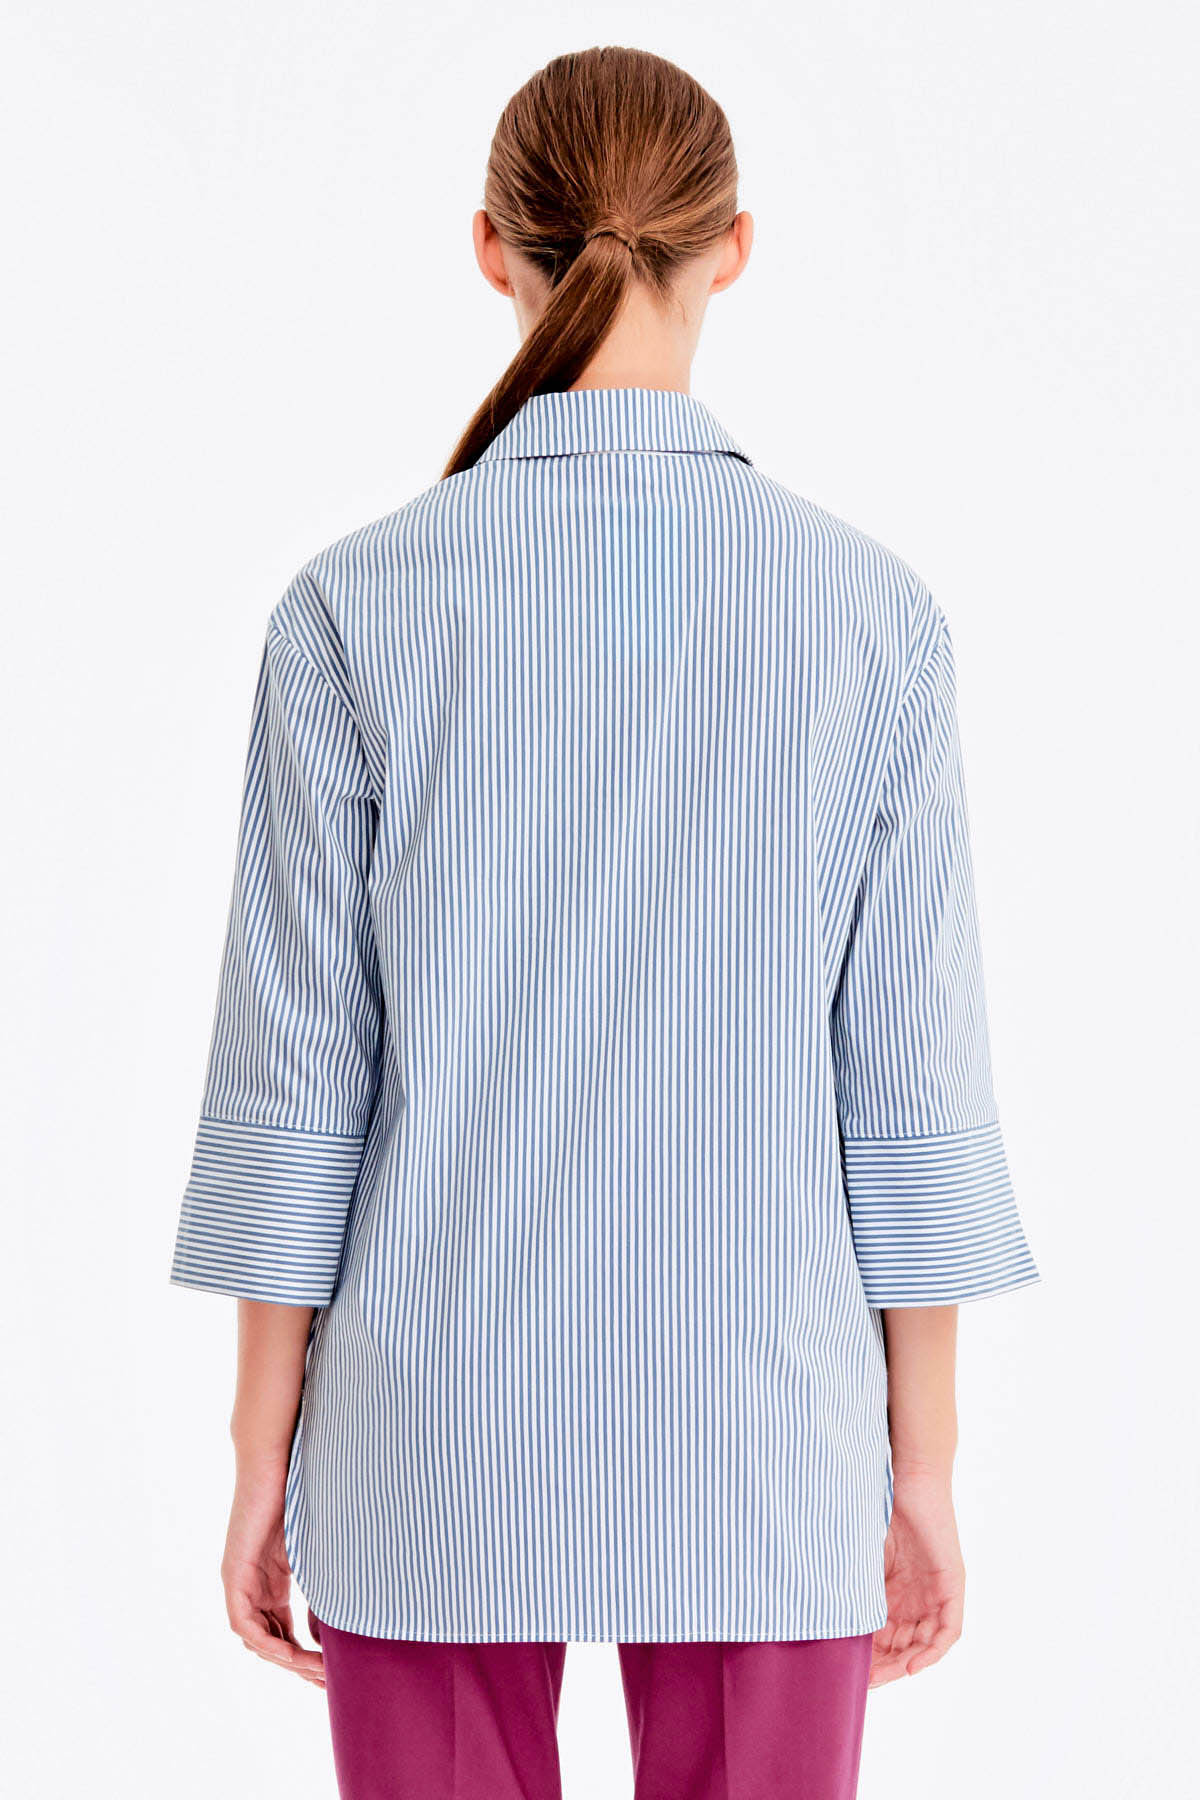 Striped shirt with slits, photo 6